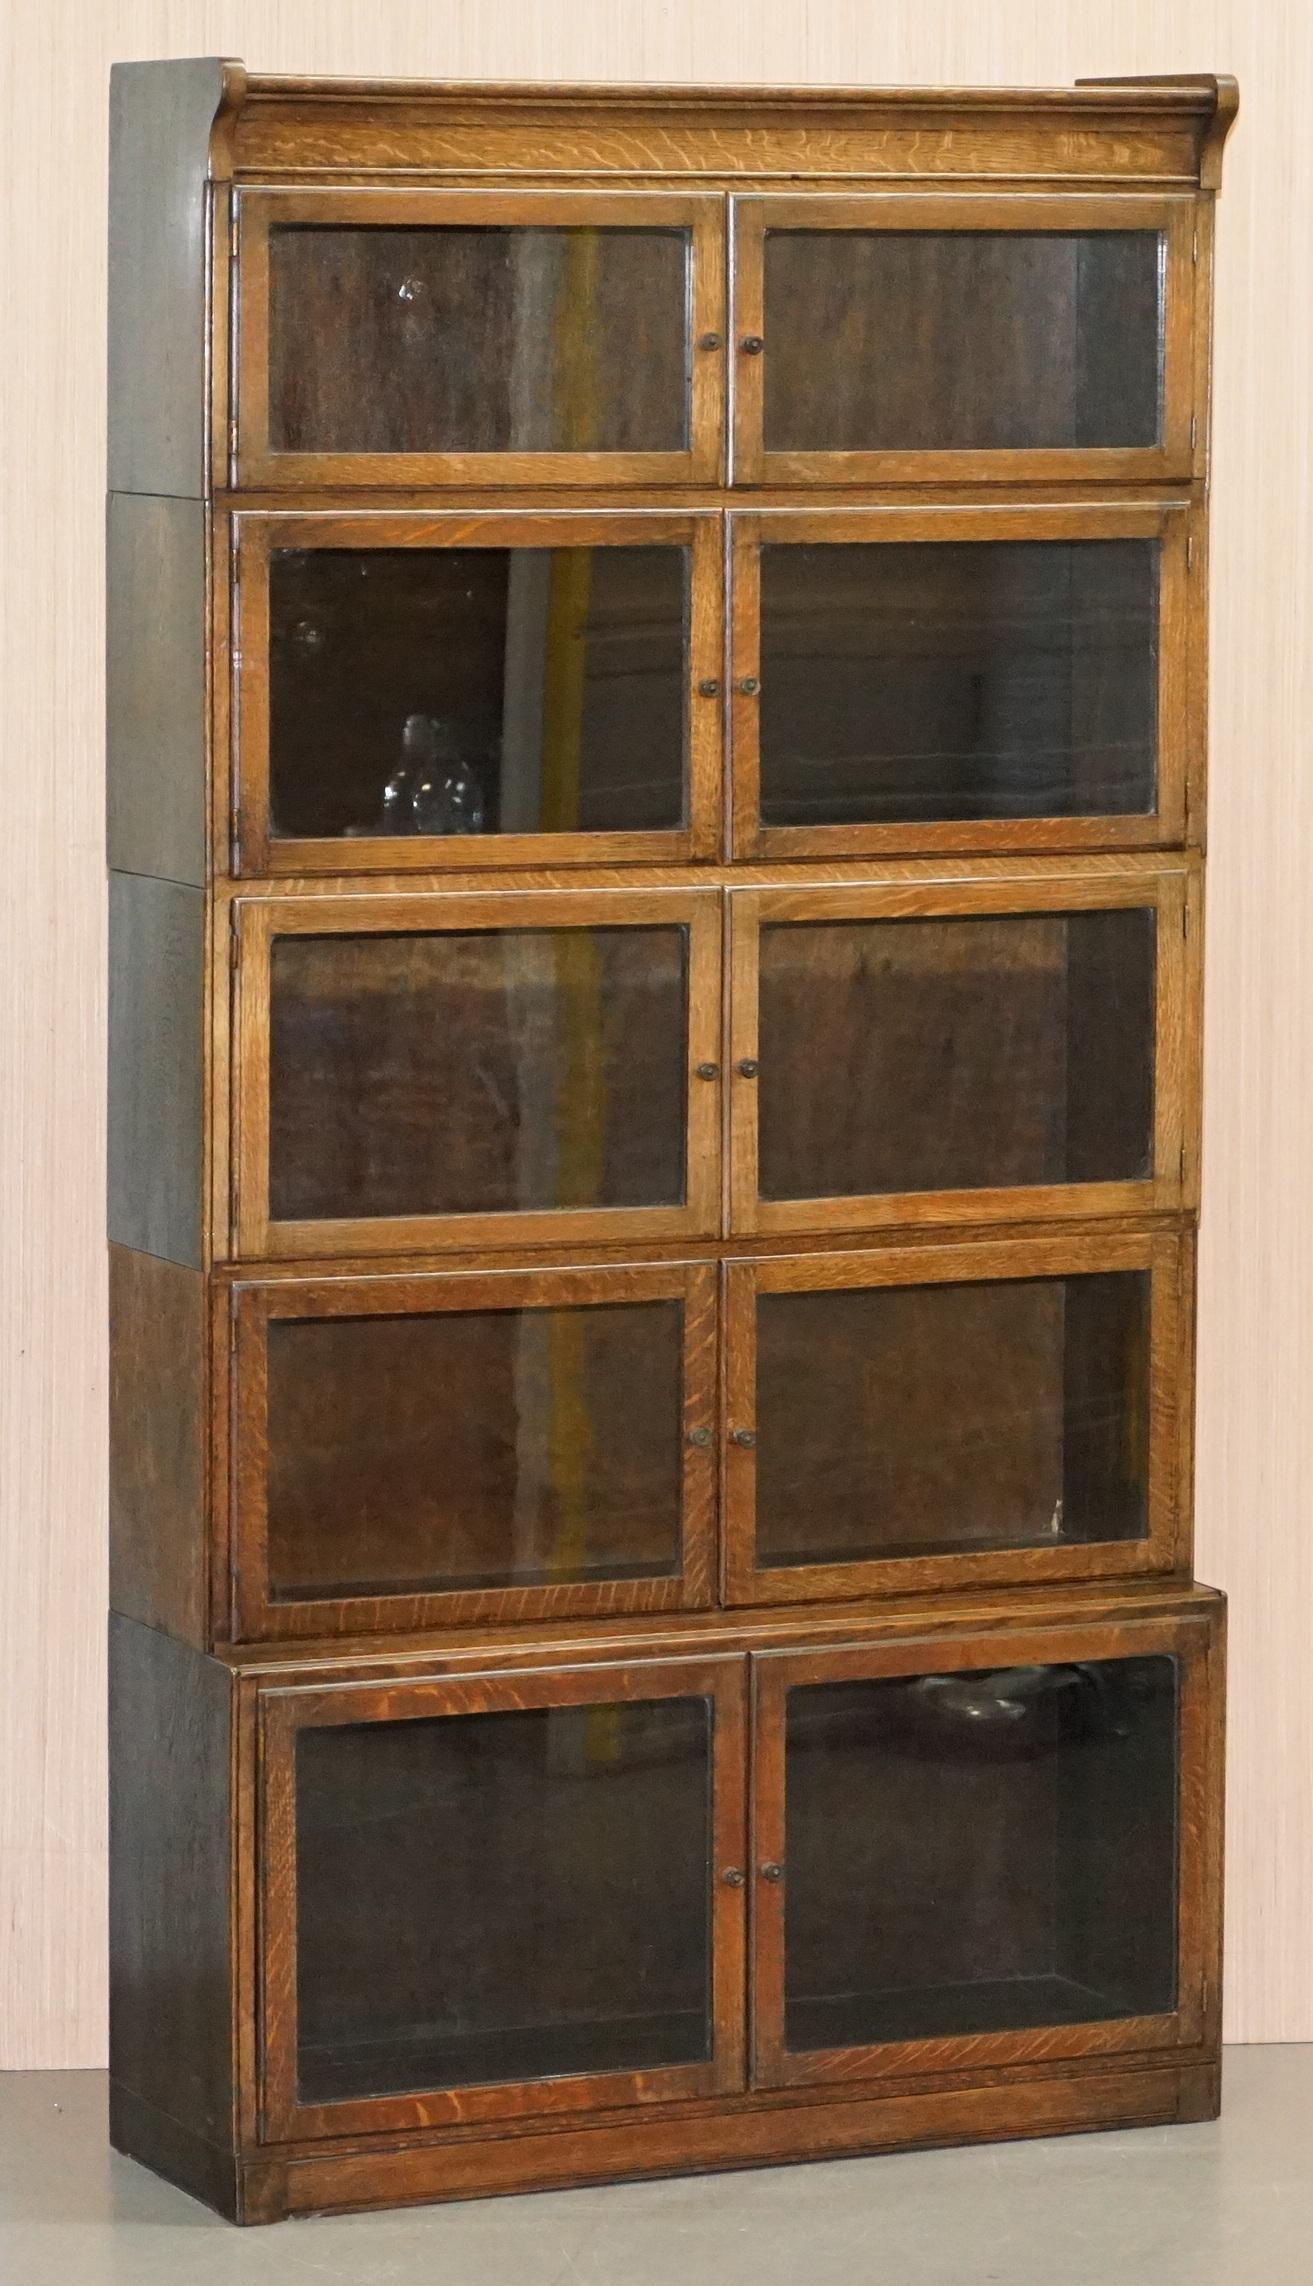 We are delighted to offer for sale this lovely pair of early circa 1900 Minty oxford stacking legal bookcases in solid oak 

A very good looking and well-made piece, there were a number of companies making this type of bookcase in the late